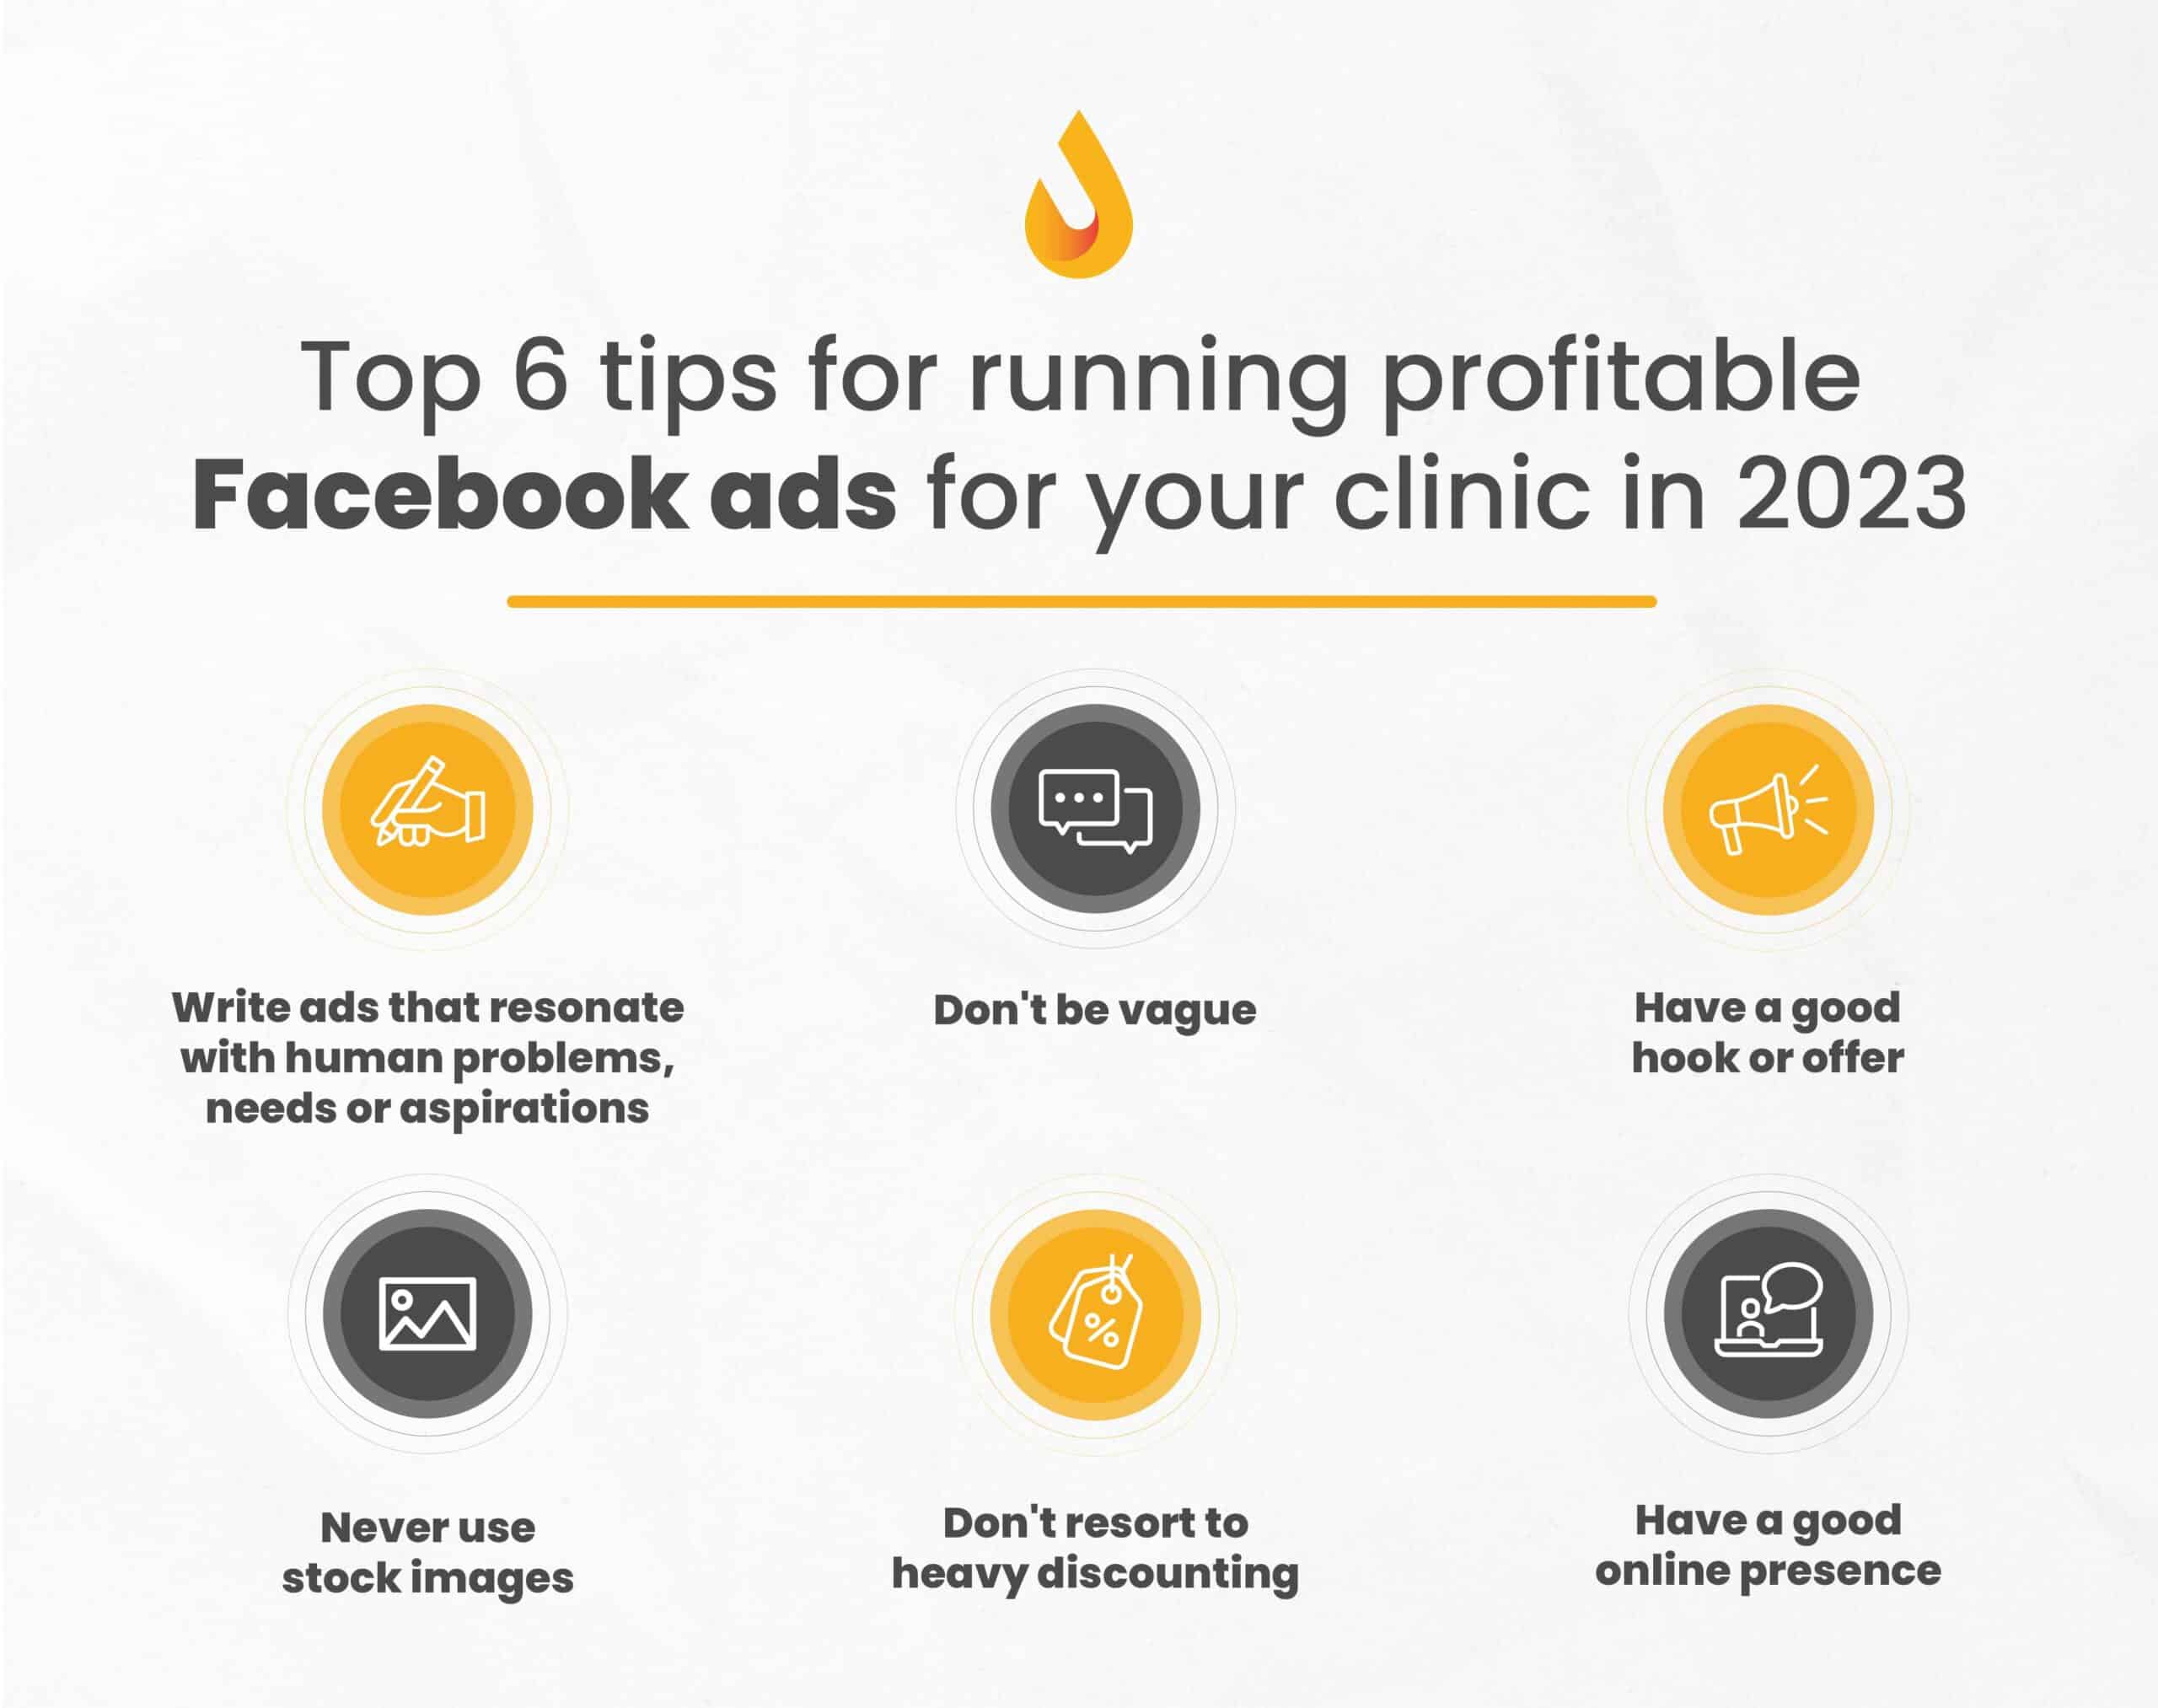 Top 6 tips for running profitable Facebook ads for your clinic scaled